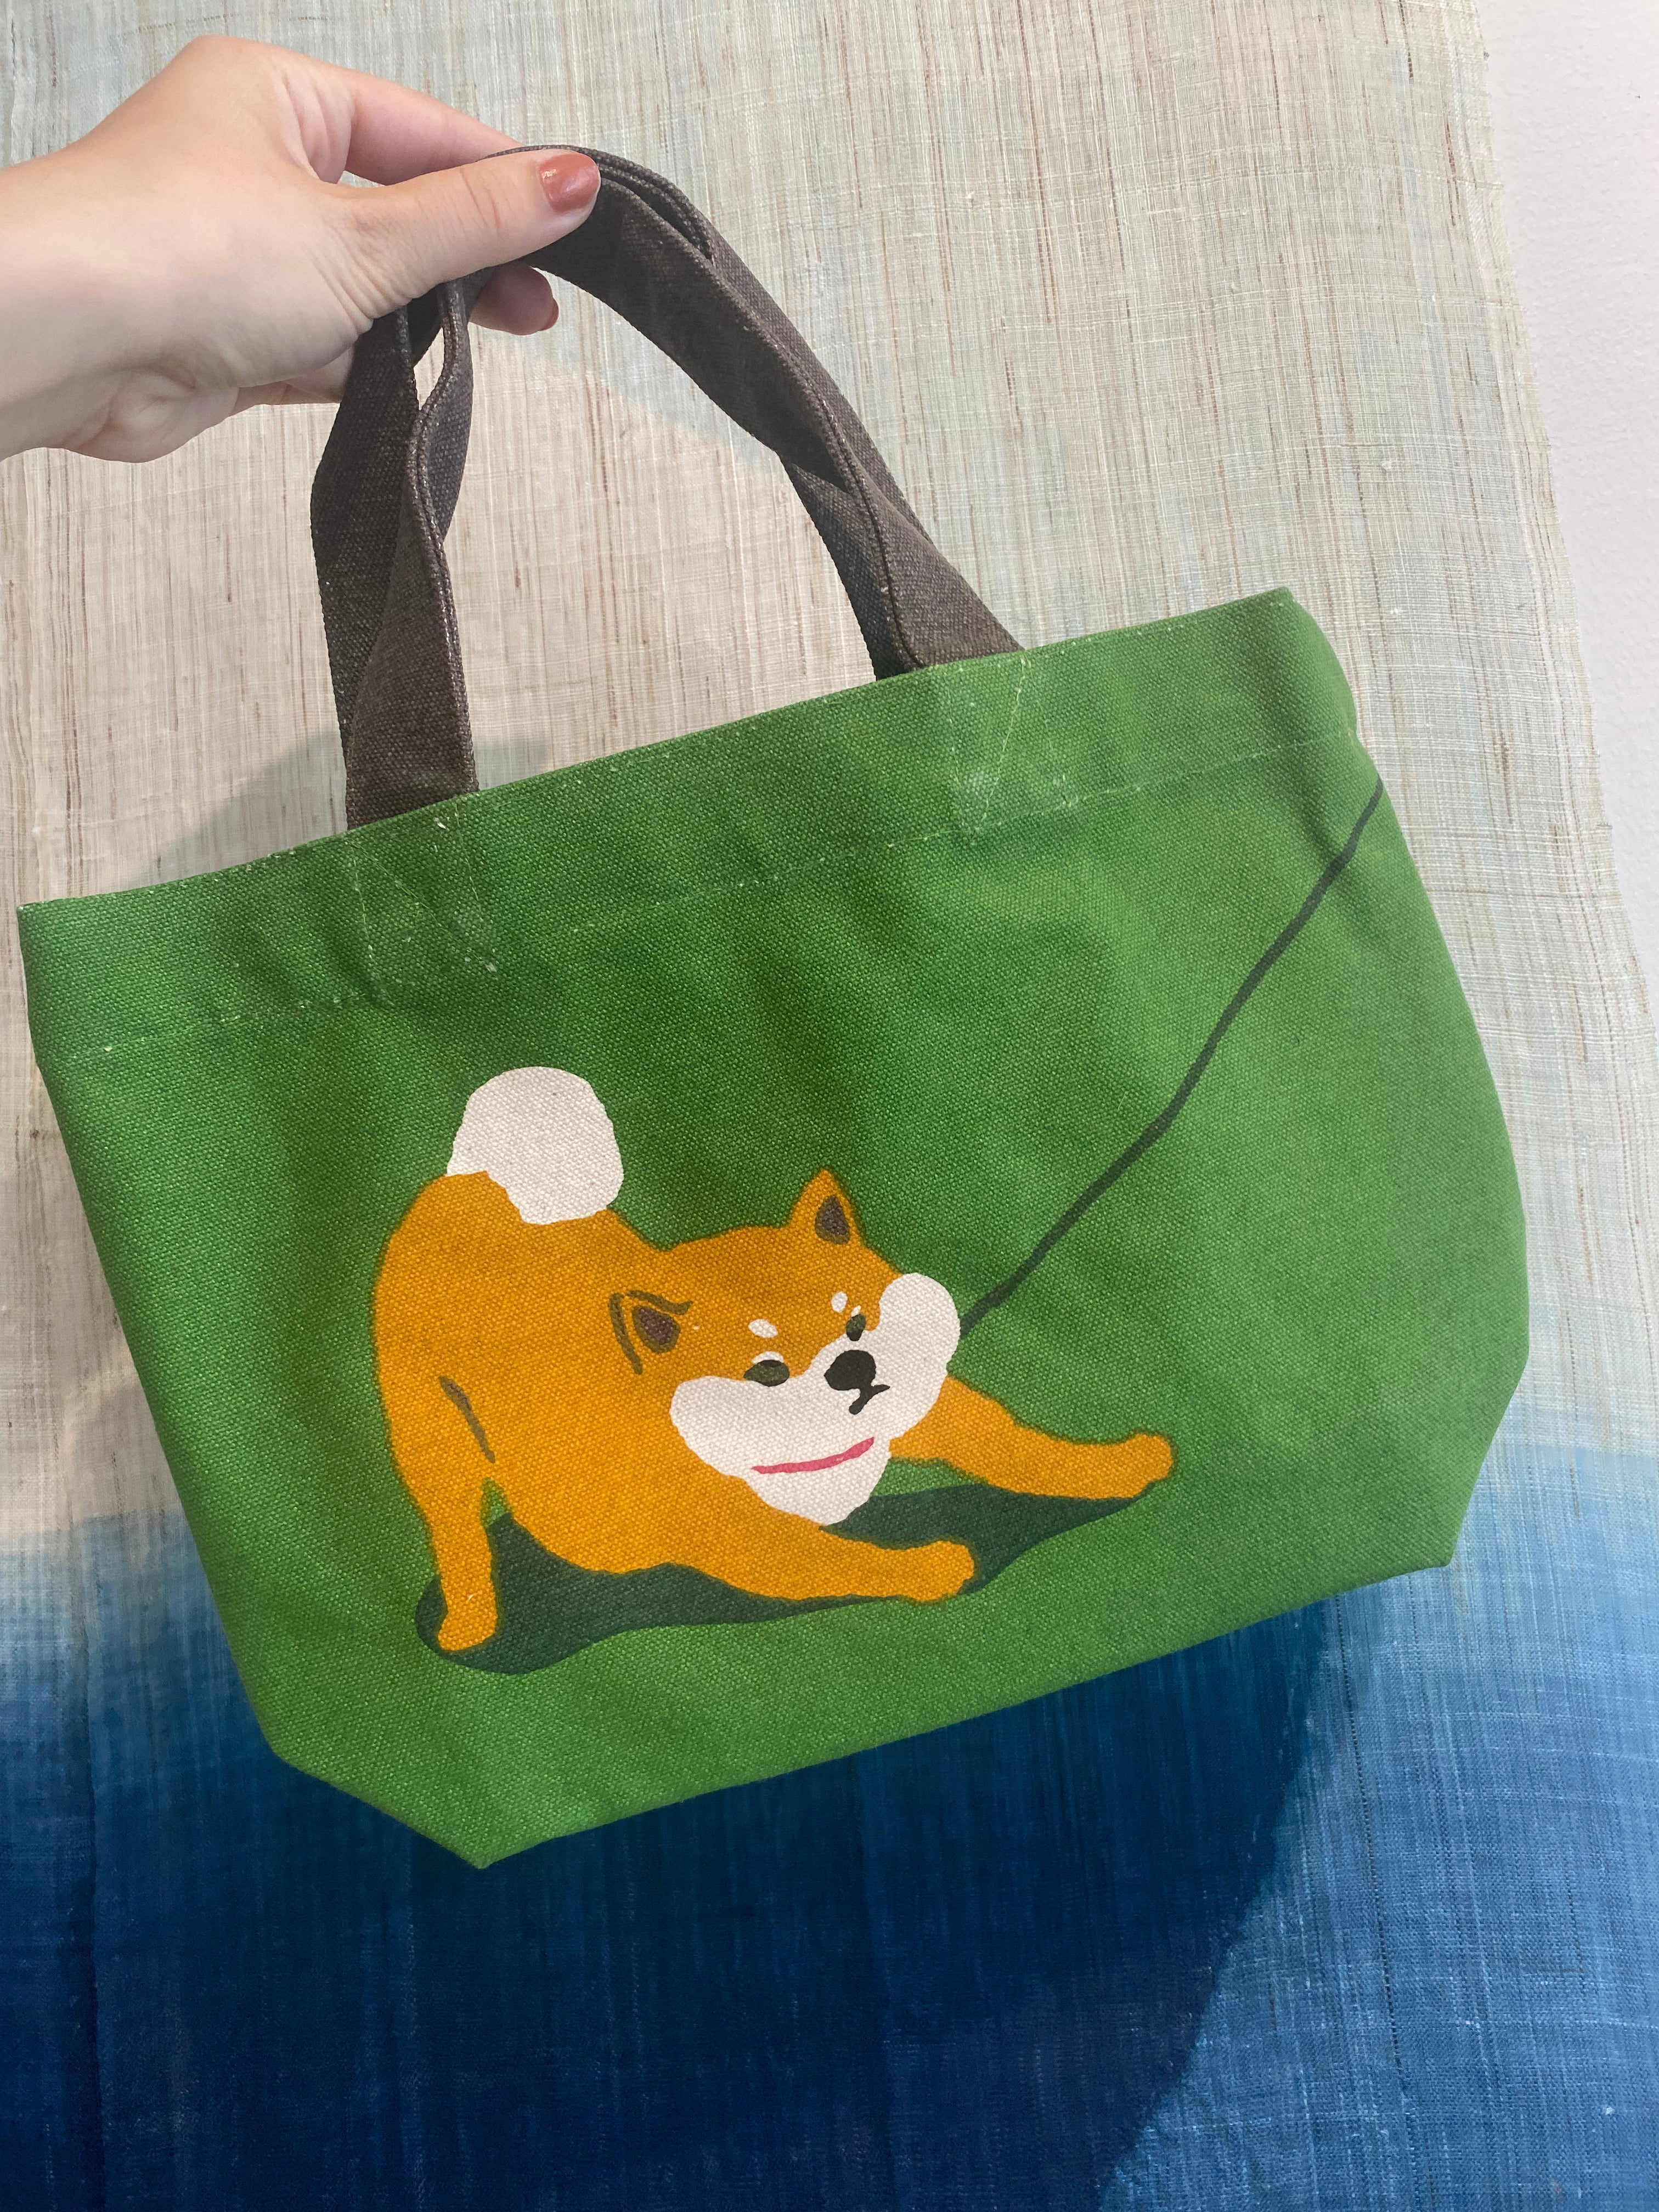 Small green bag with a stubborn shiba that pulls on a leash